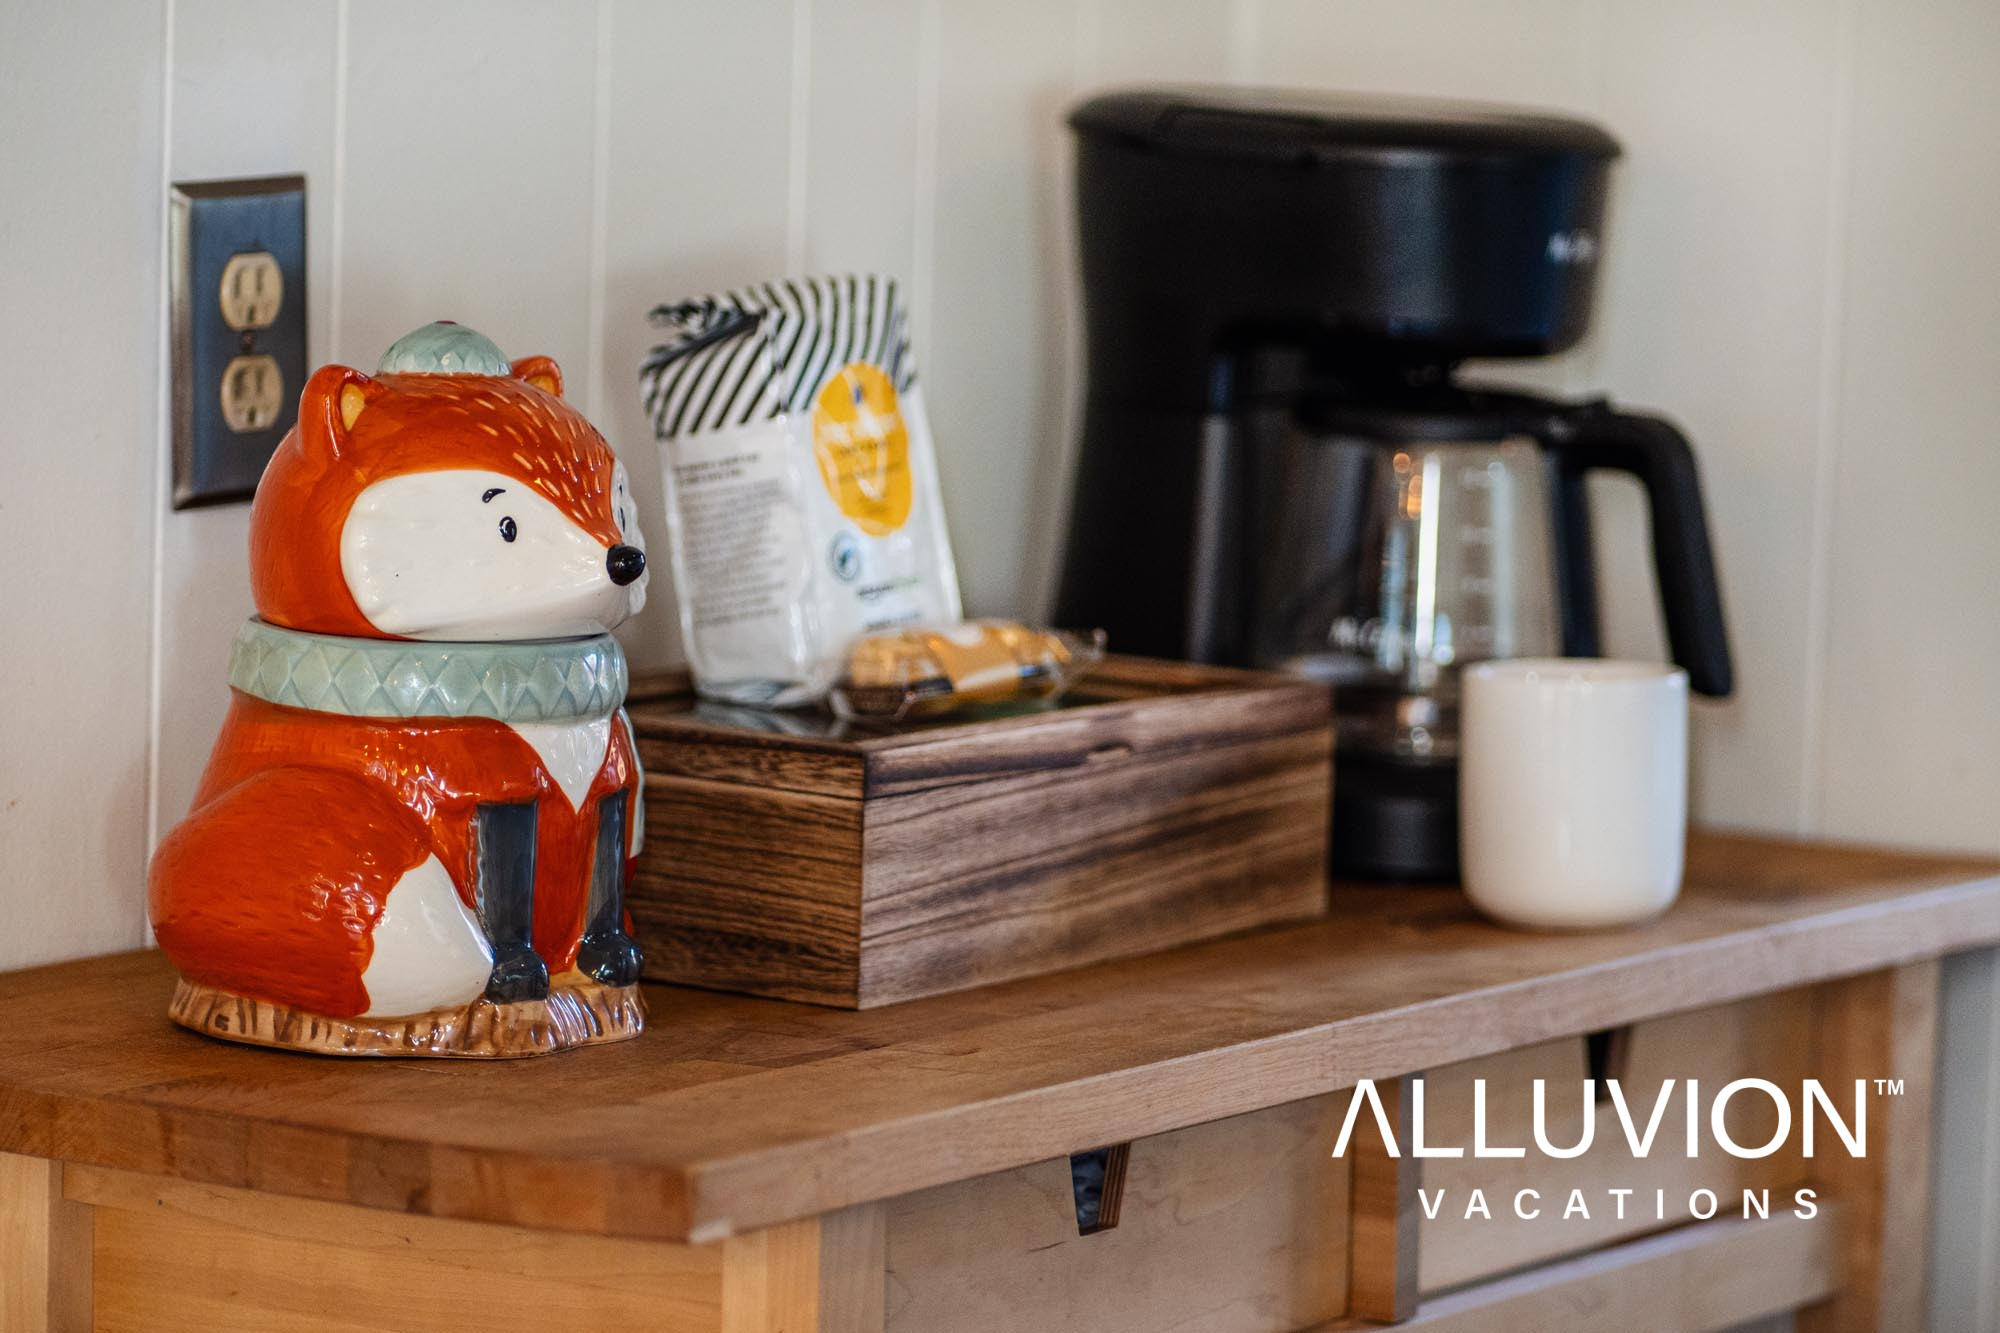 Discover Alluvion Vacations' Newest Wellness-Focused Getaway: A Catskill Mountains Cabin Retreat in Windham, NY – Presented by Alluvion Vacations – Photography by Maxwell Alexander for Alluvion Media – Best Experiential Travel and Hospitality – Vacation Rental Management Company Upstate New York